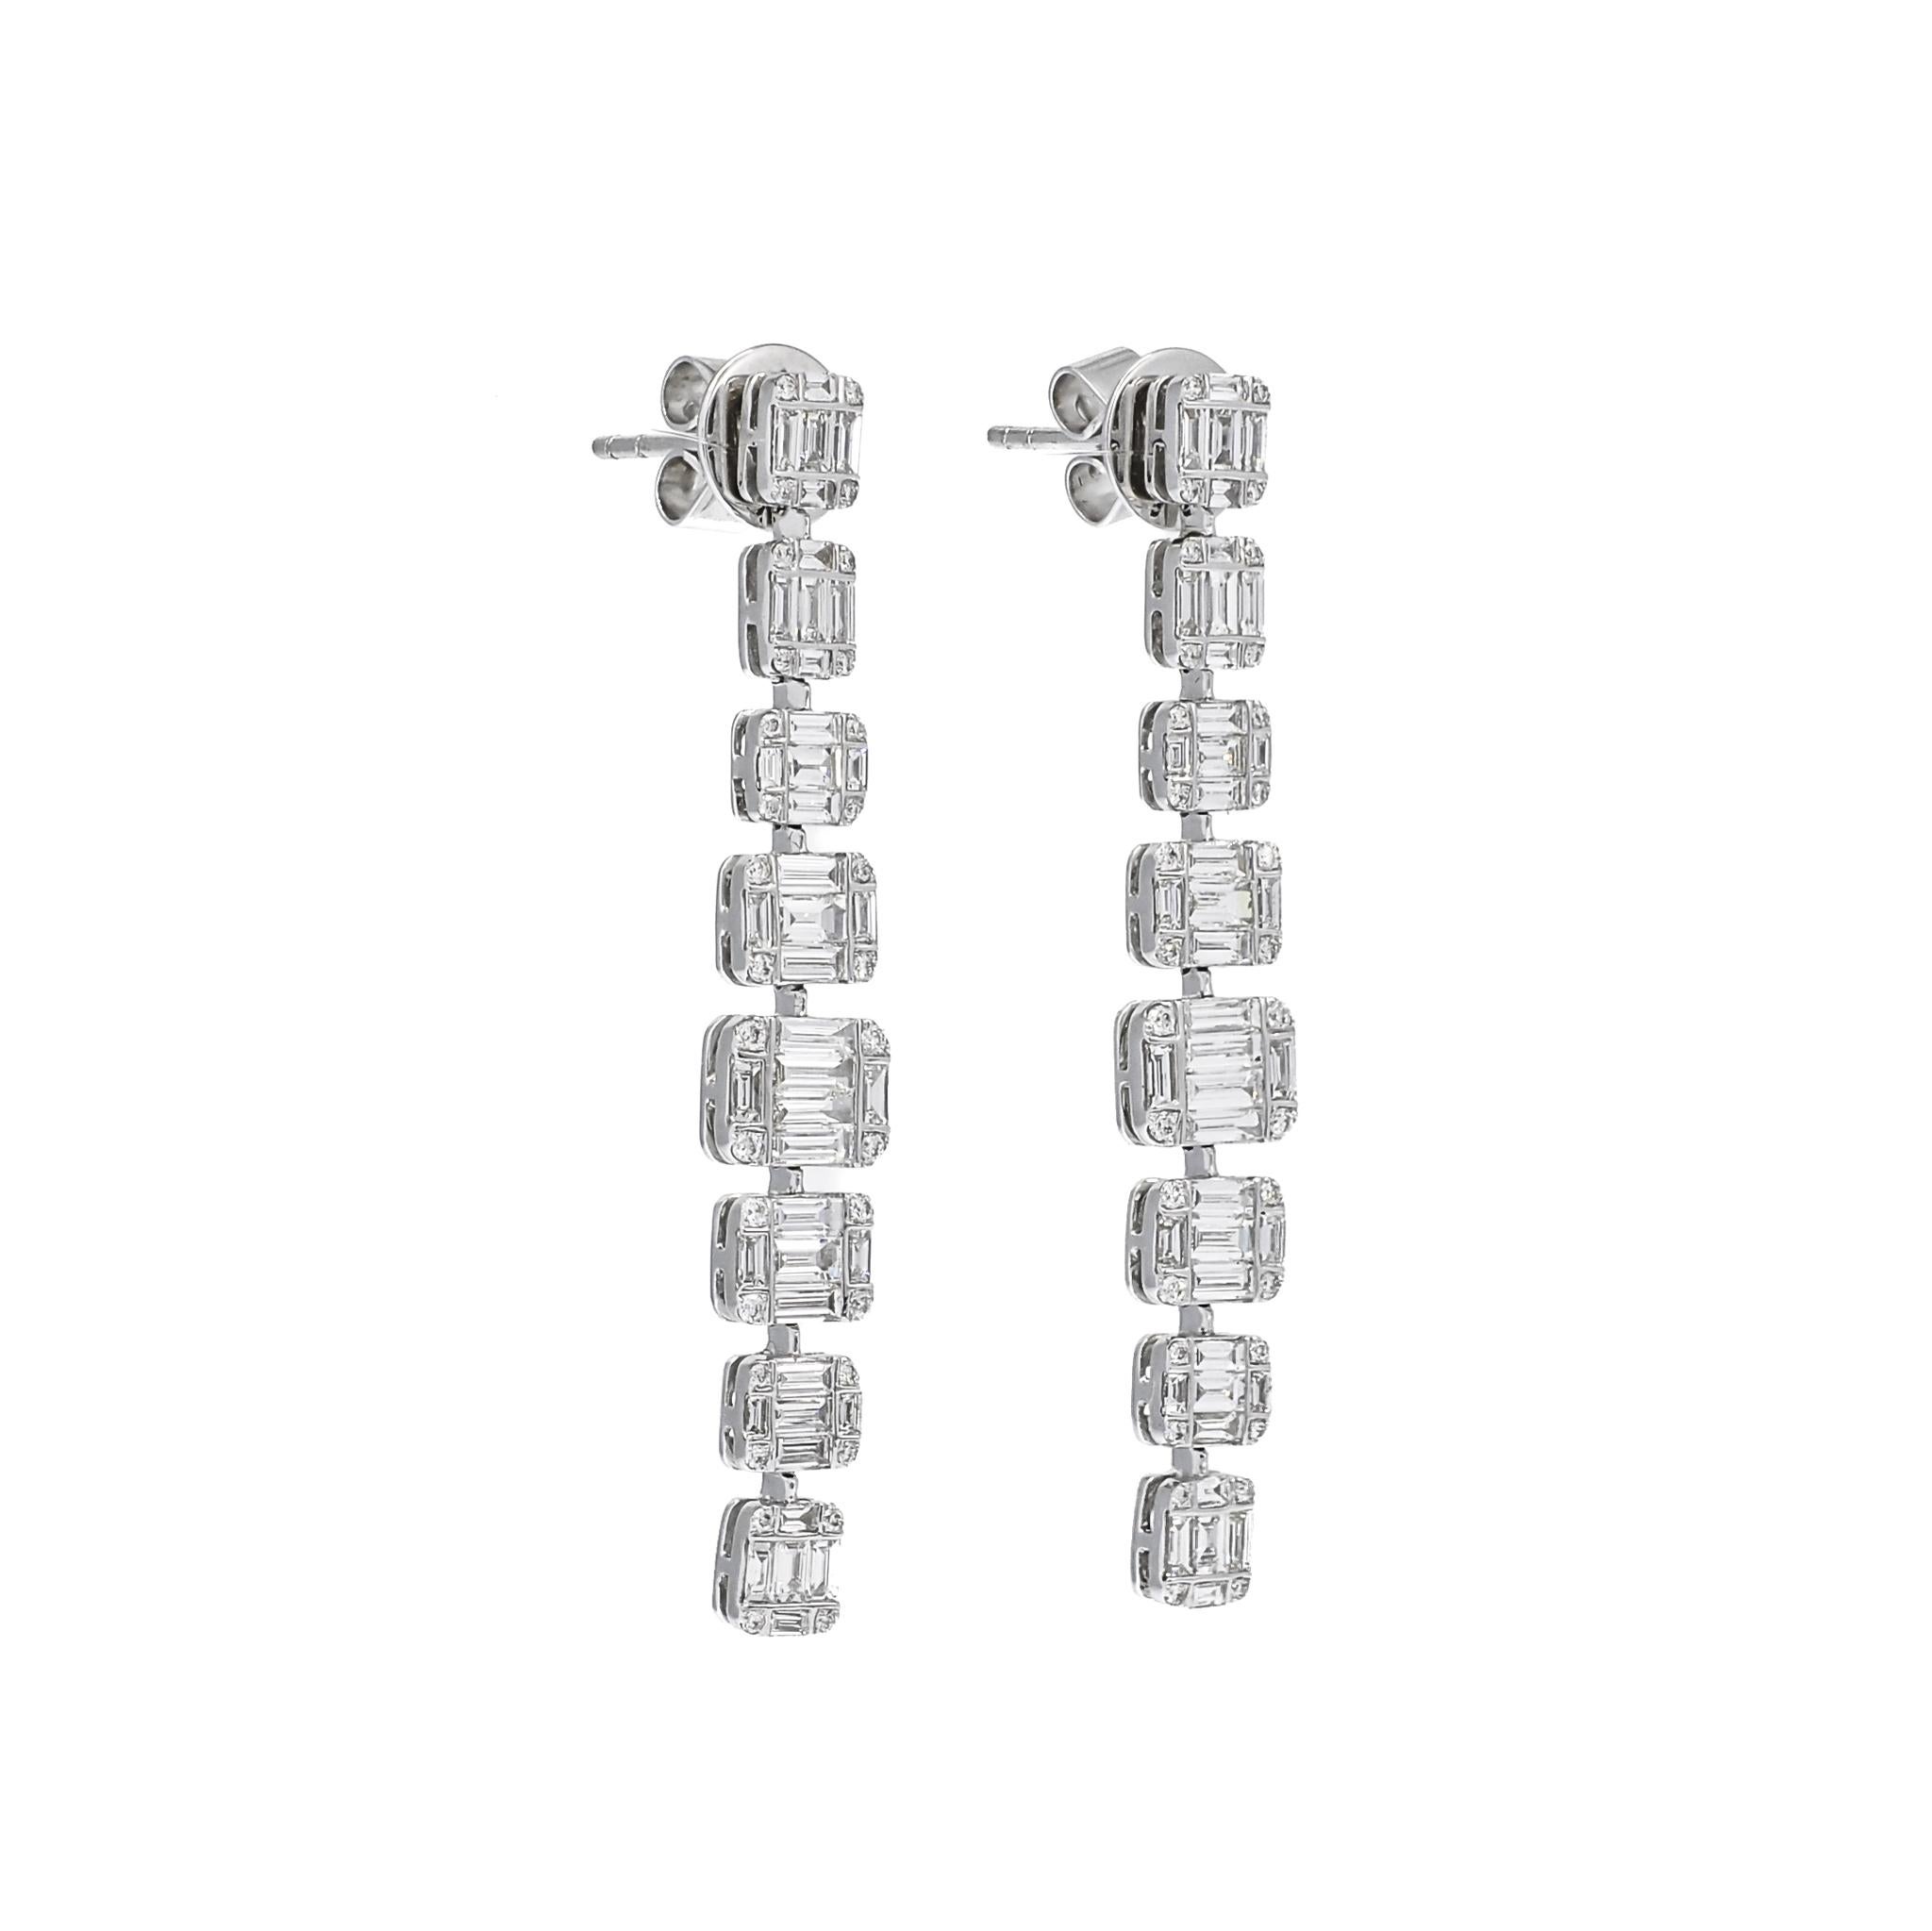 Indulge in the epitome of luxury with the exquisite 18KT White Gold Baguette Round 8 Graduating Cluster Drop Dangler Earrings. This remarkable piece transcends ordinary elegance, captivating the discerning eye with its opulent design and impeccable